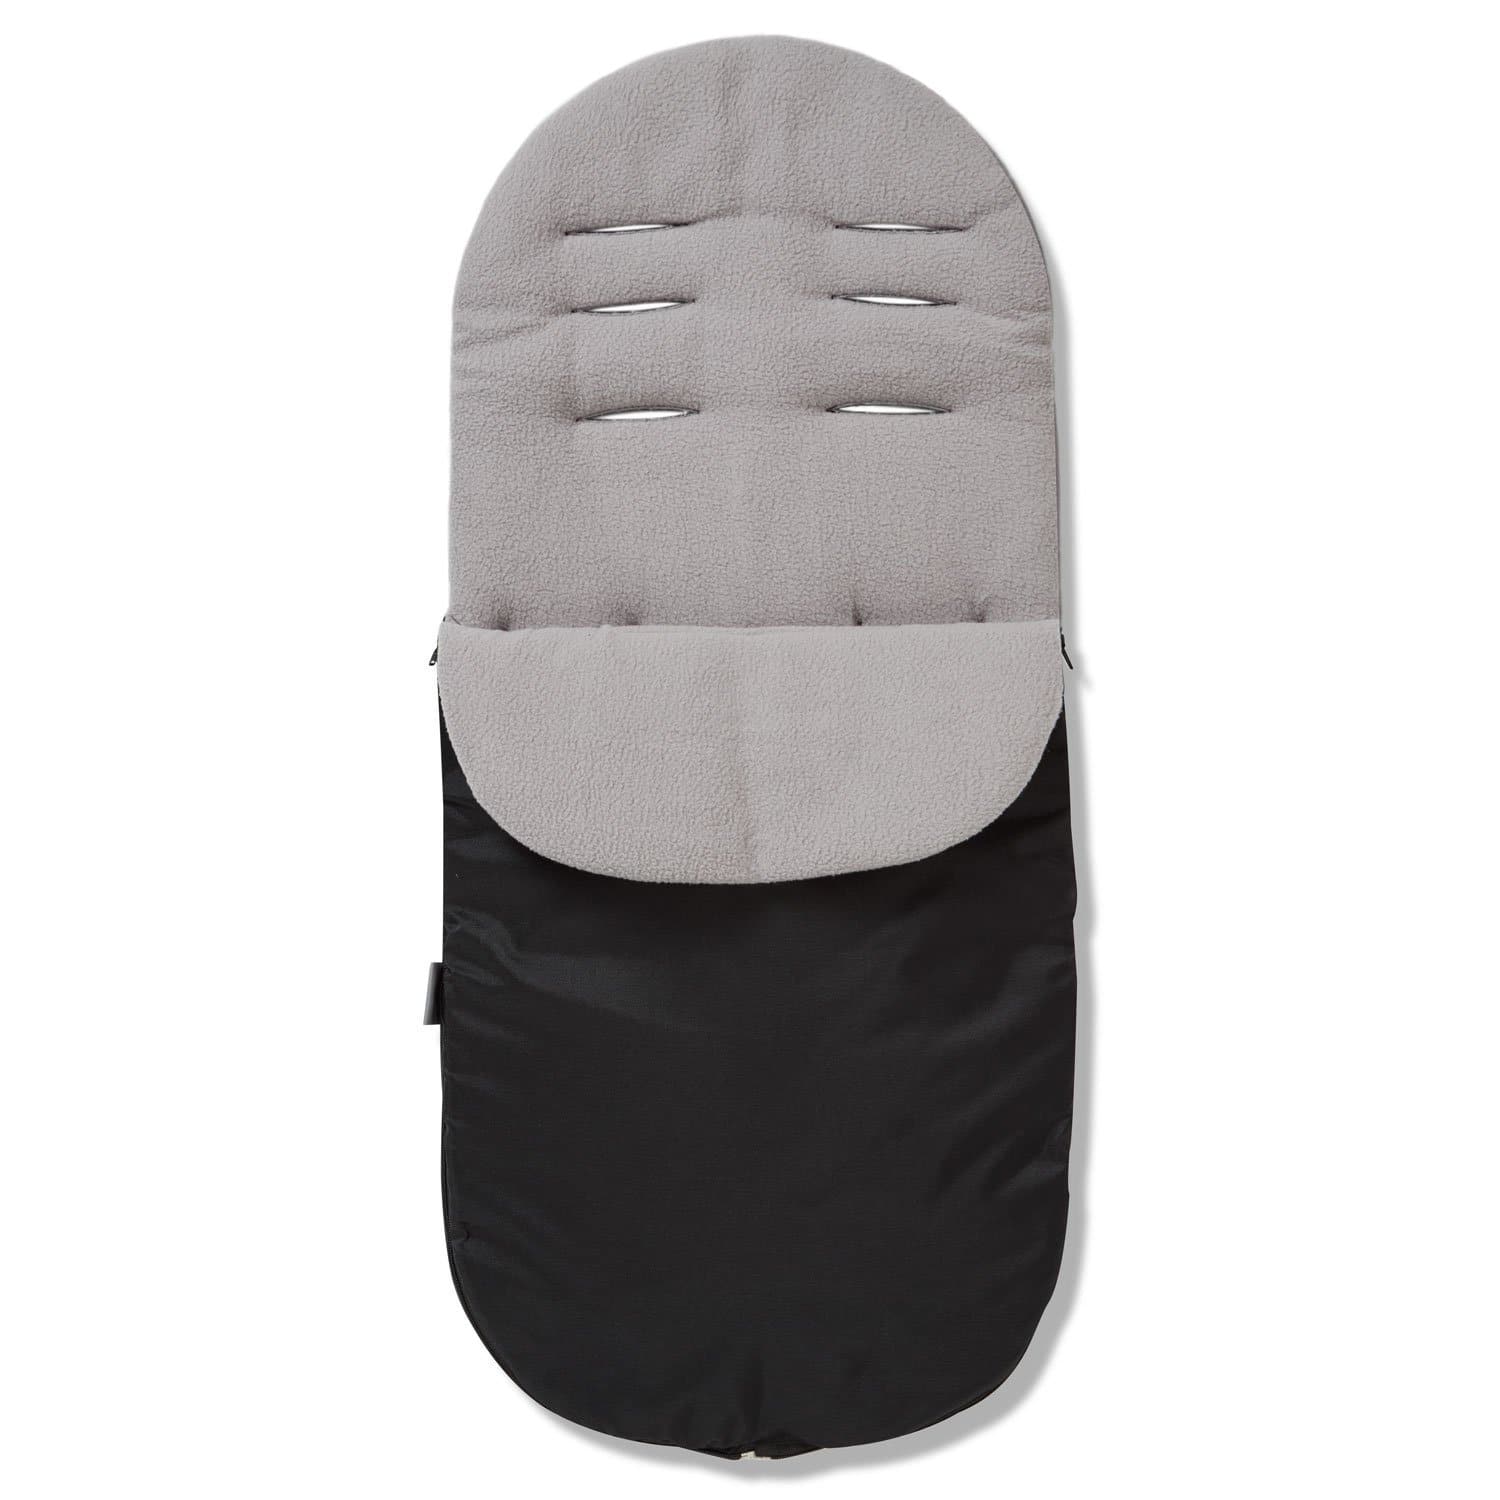 Footmuff / Cosy Toes Compatible with Firstwheels - Grey / Fits All Models | For Your Little One